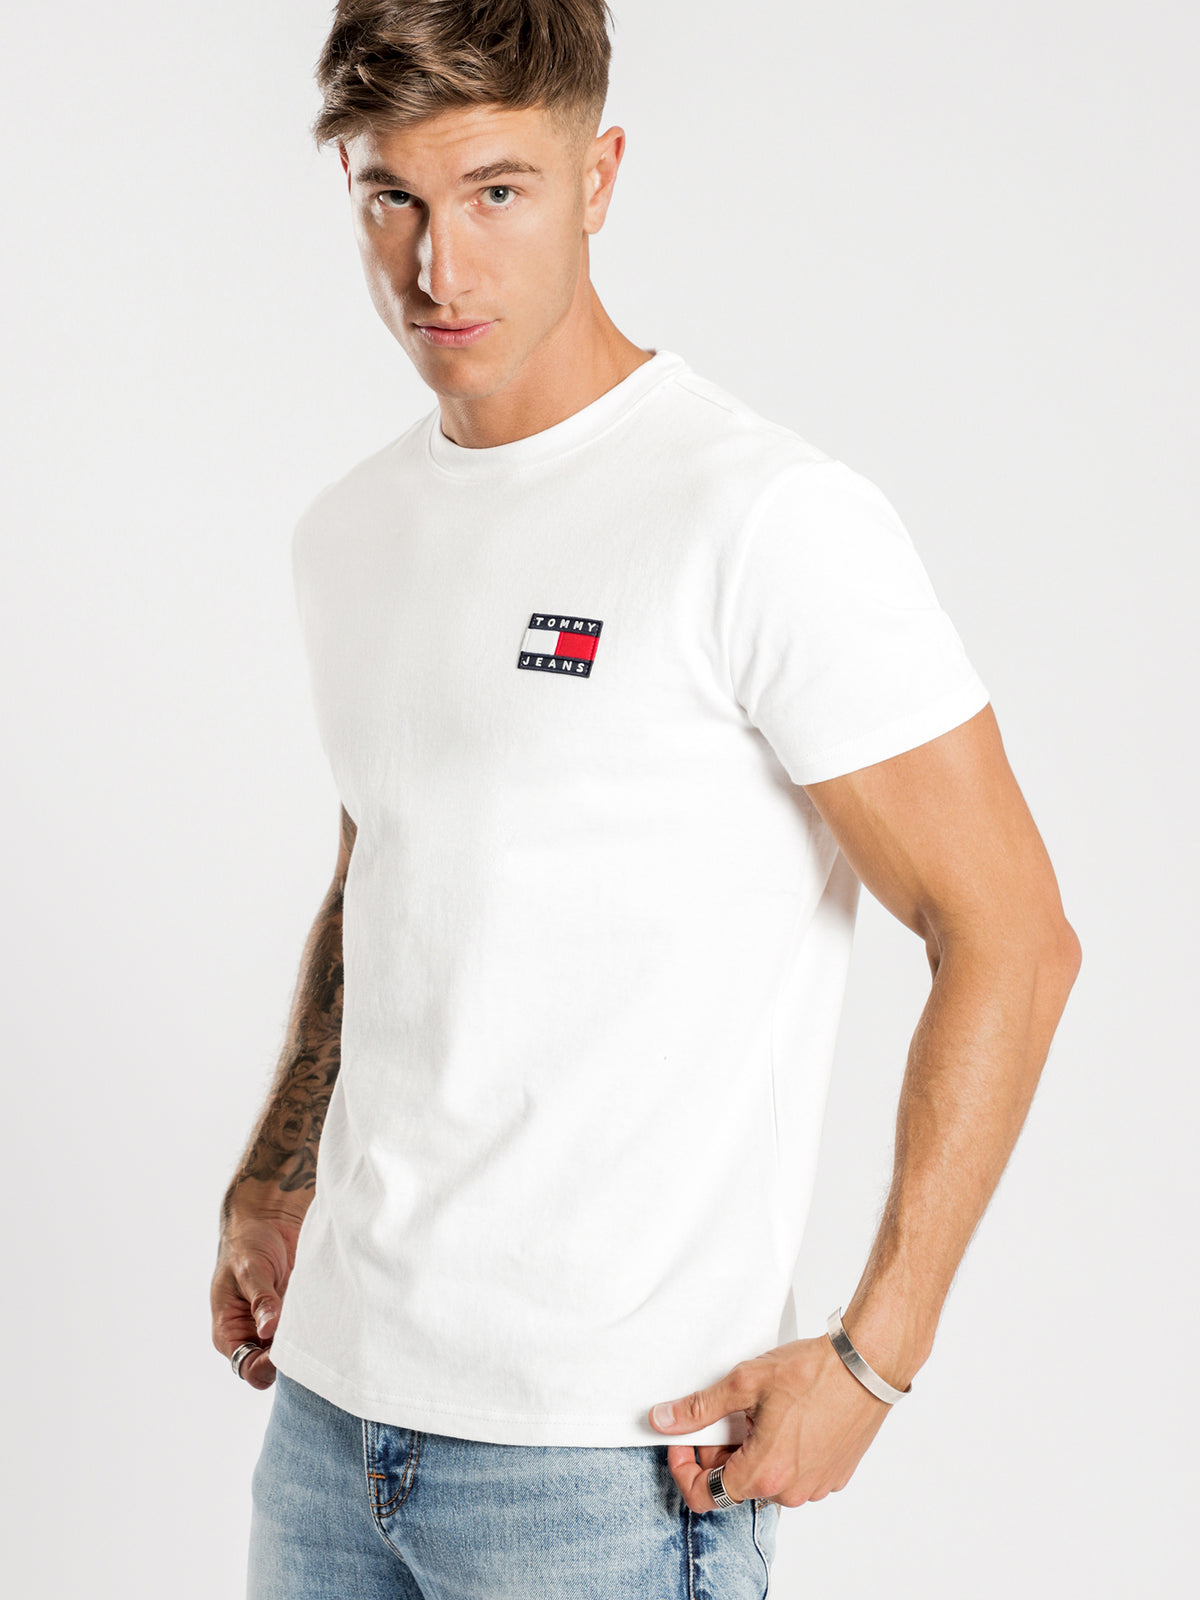 Tommy Jeans Badge Short Sleeve T-Shirt in White